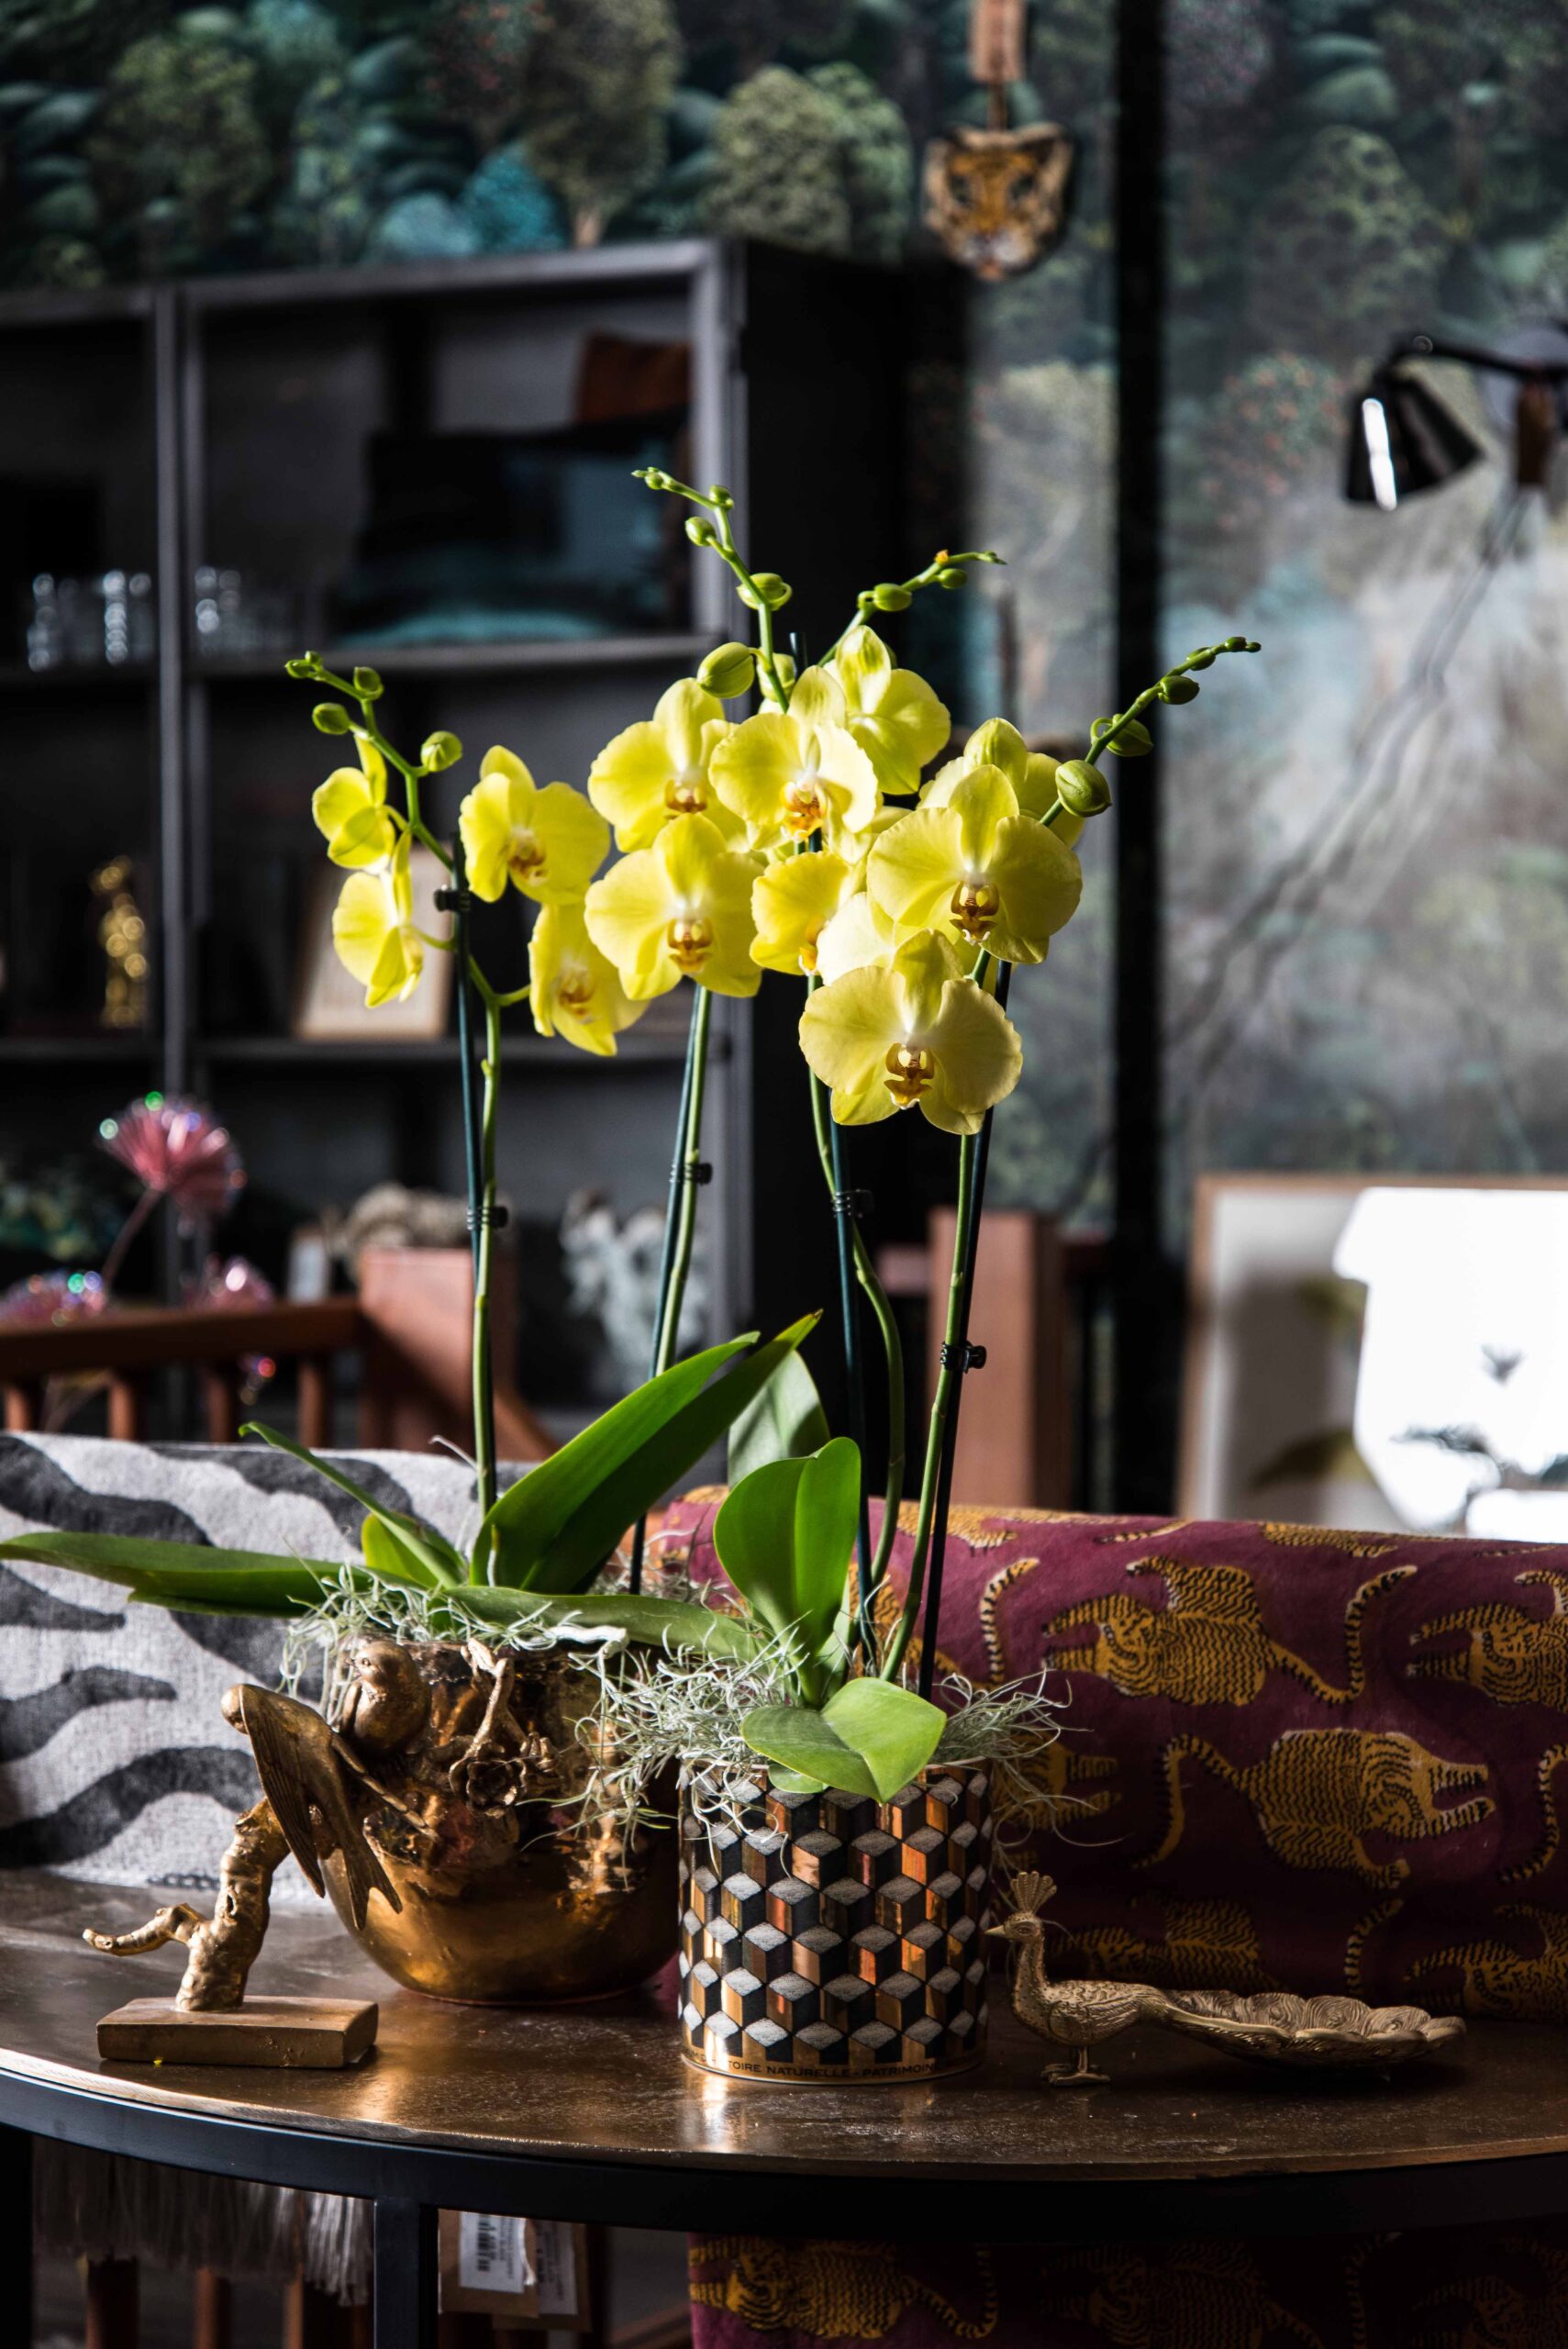 Winter: time for new inspiration with orchids!